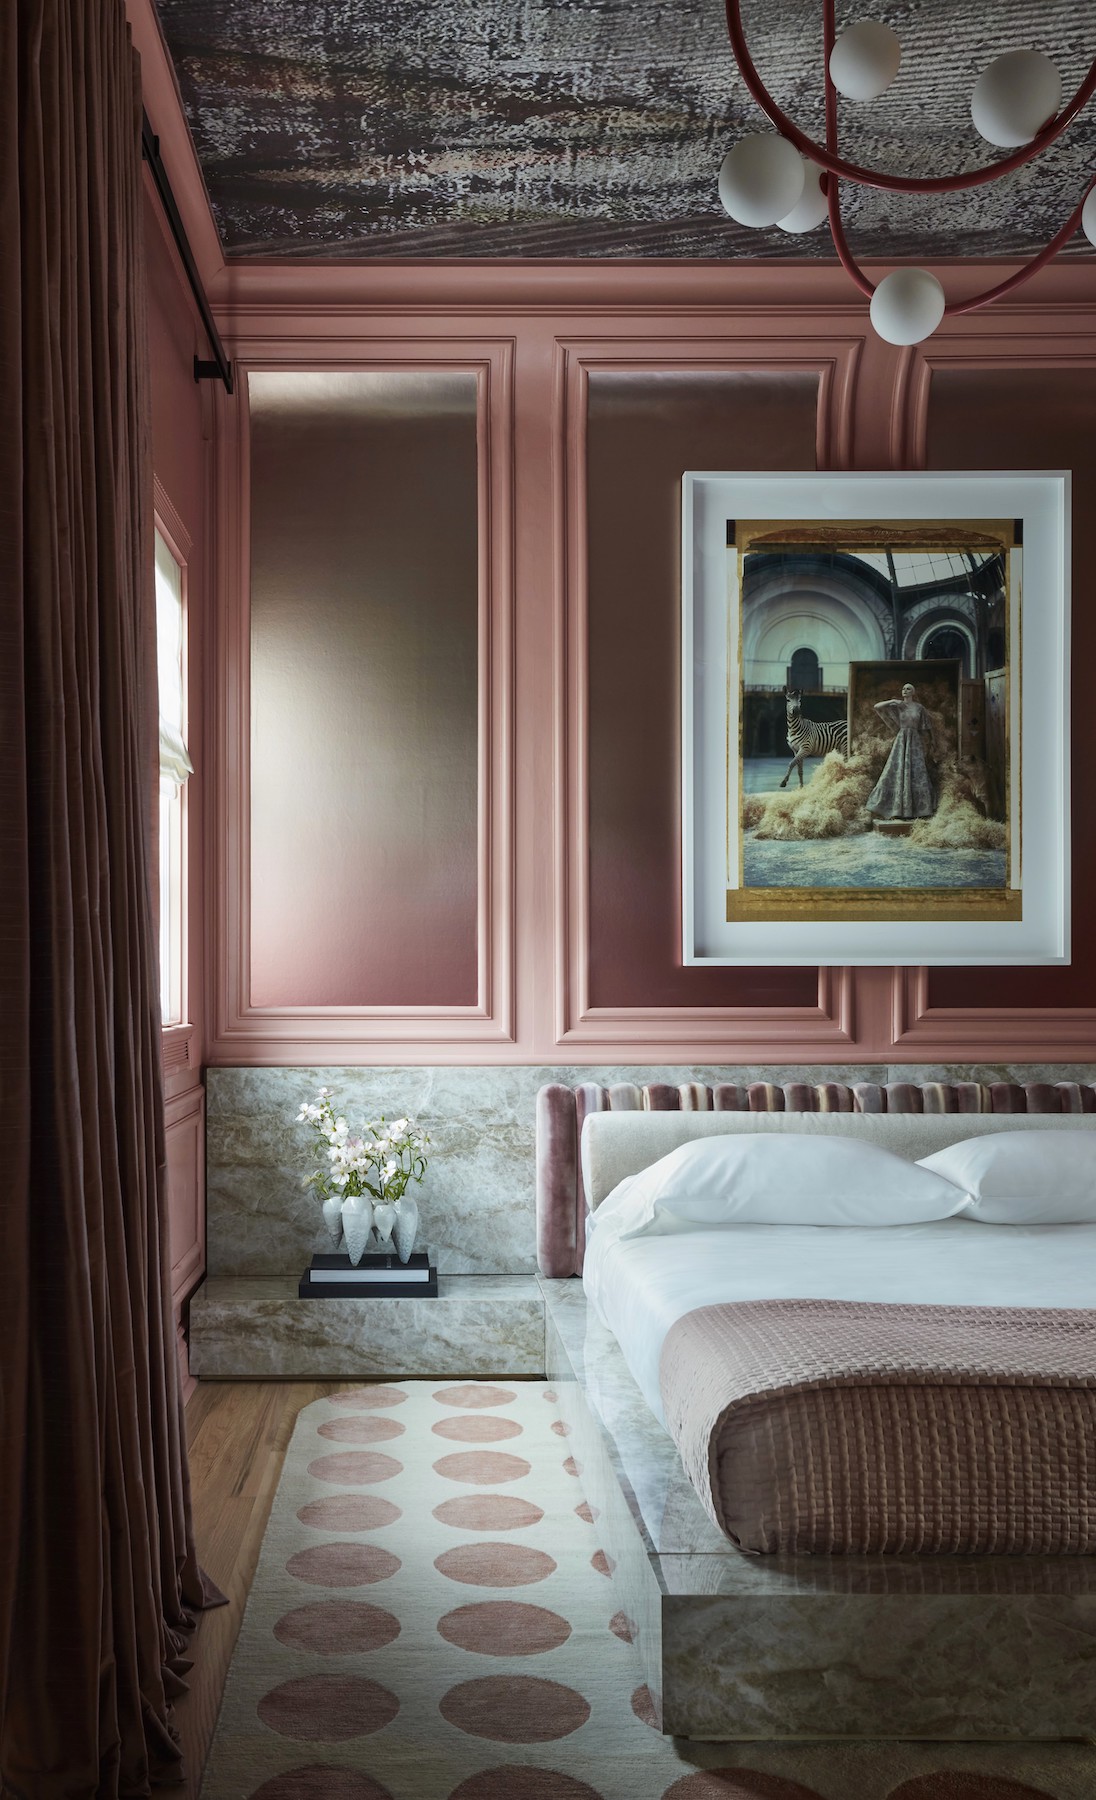 Nina Magon designed a small bedroom with big appeal at Kips Bay Decorator Showhouse Palm Beach - Effect Magazine